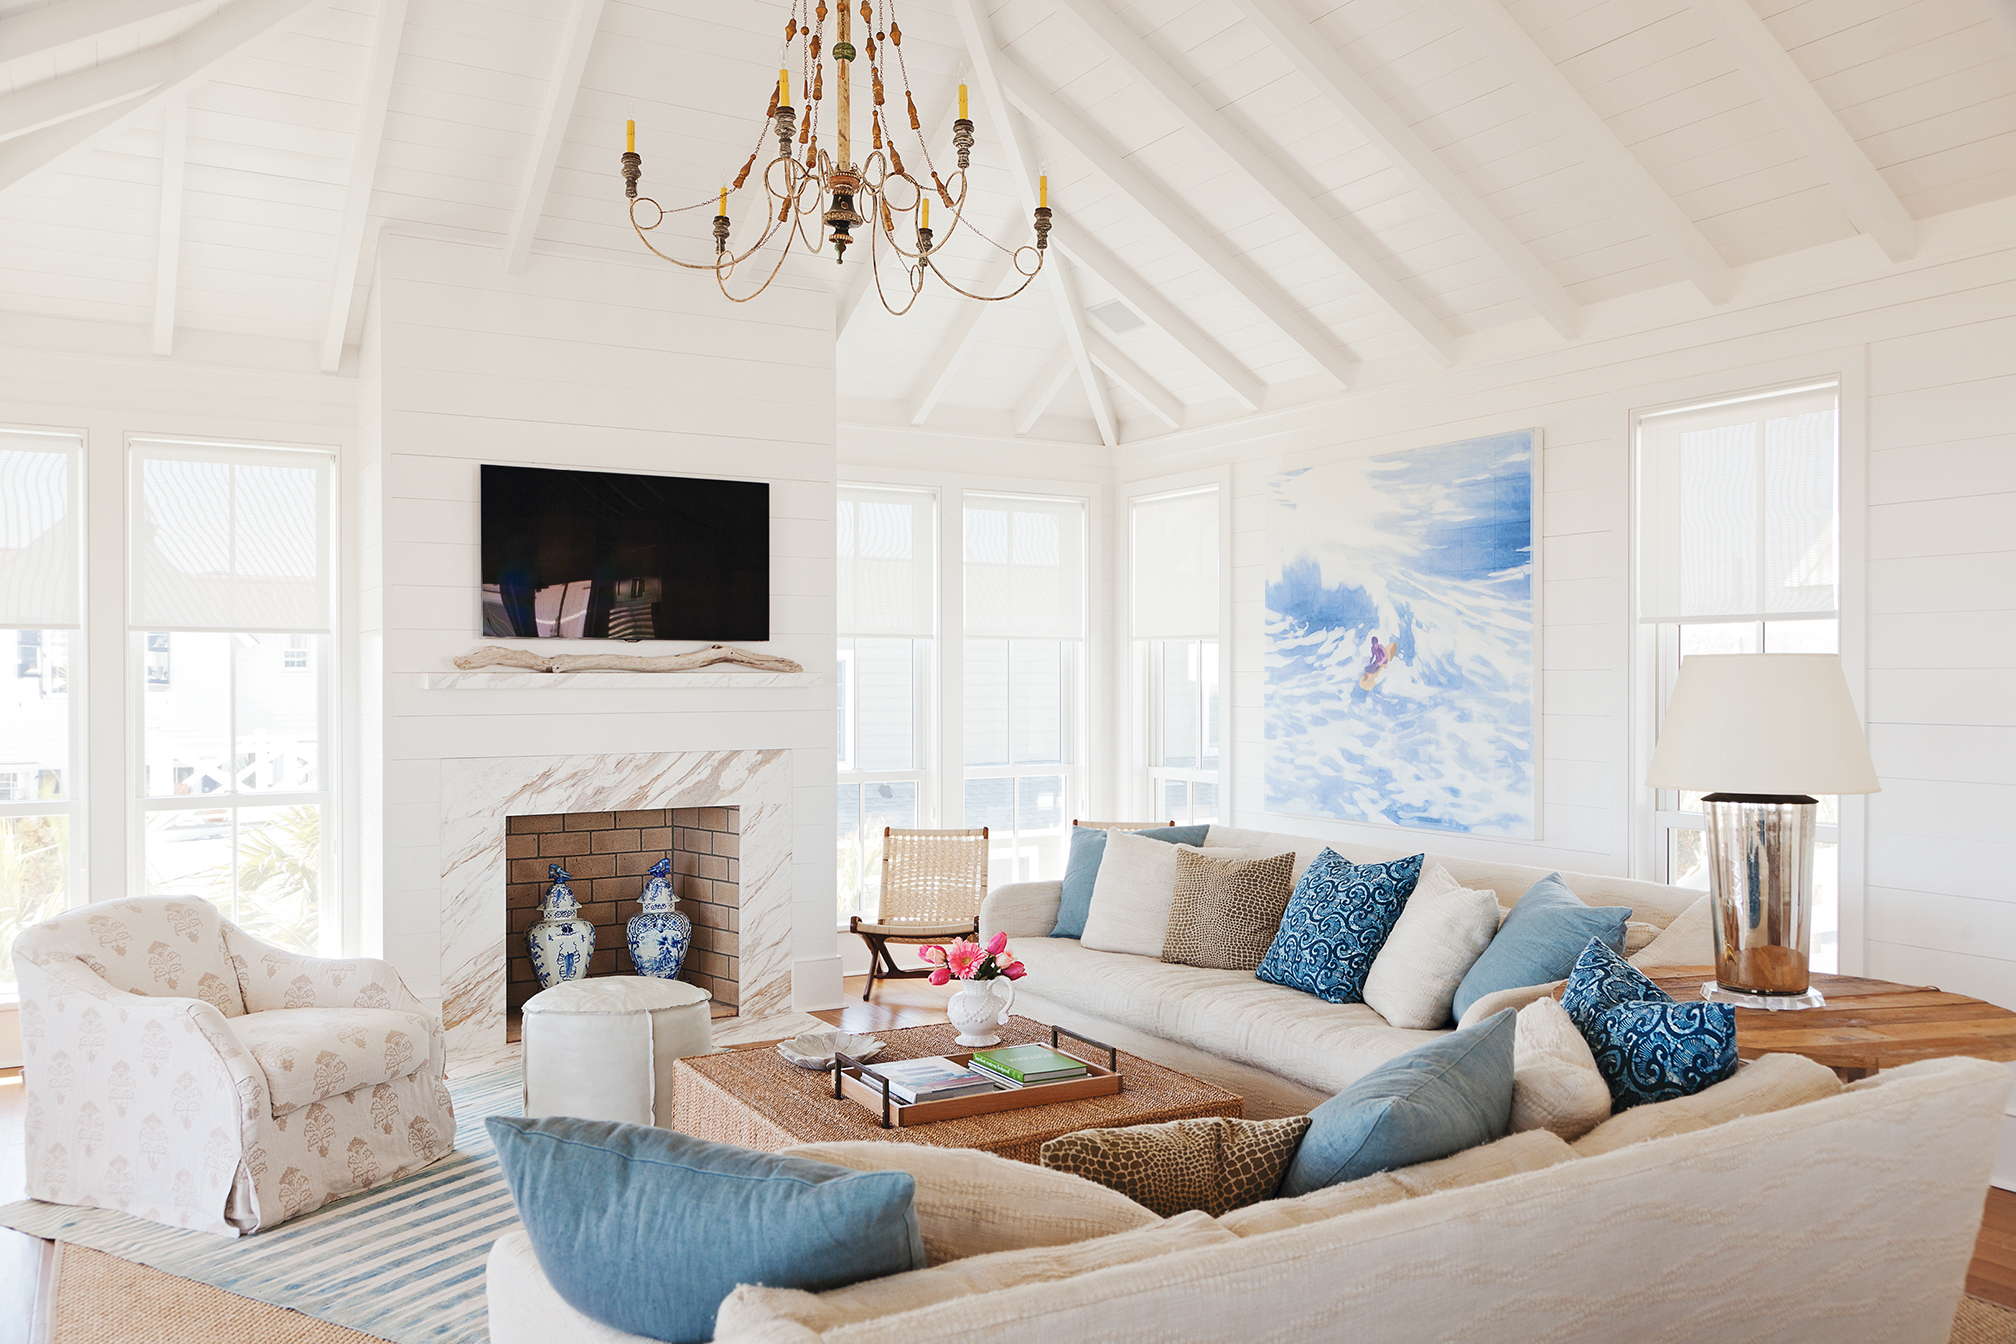 Old-School Charm: White shiplap walls throughout lend a classic beach-house feel while showcasing contemporary art, such as this surfer painting by Isca Greenfield Sanders in the living room.